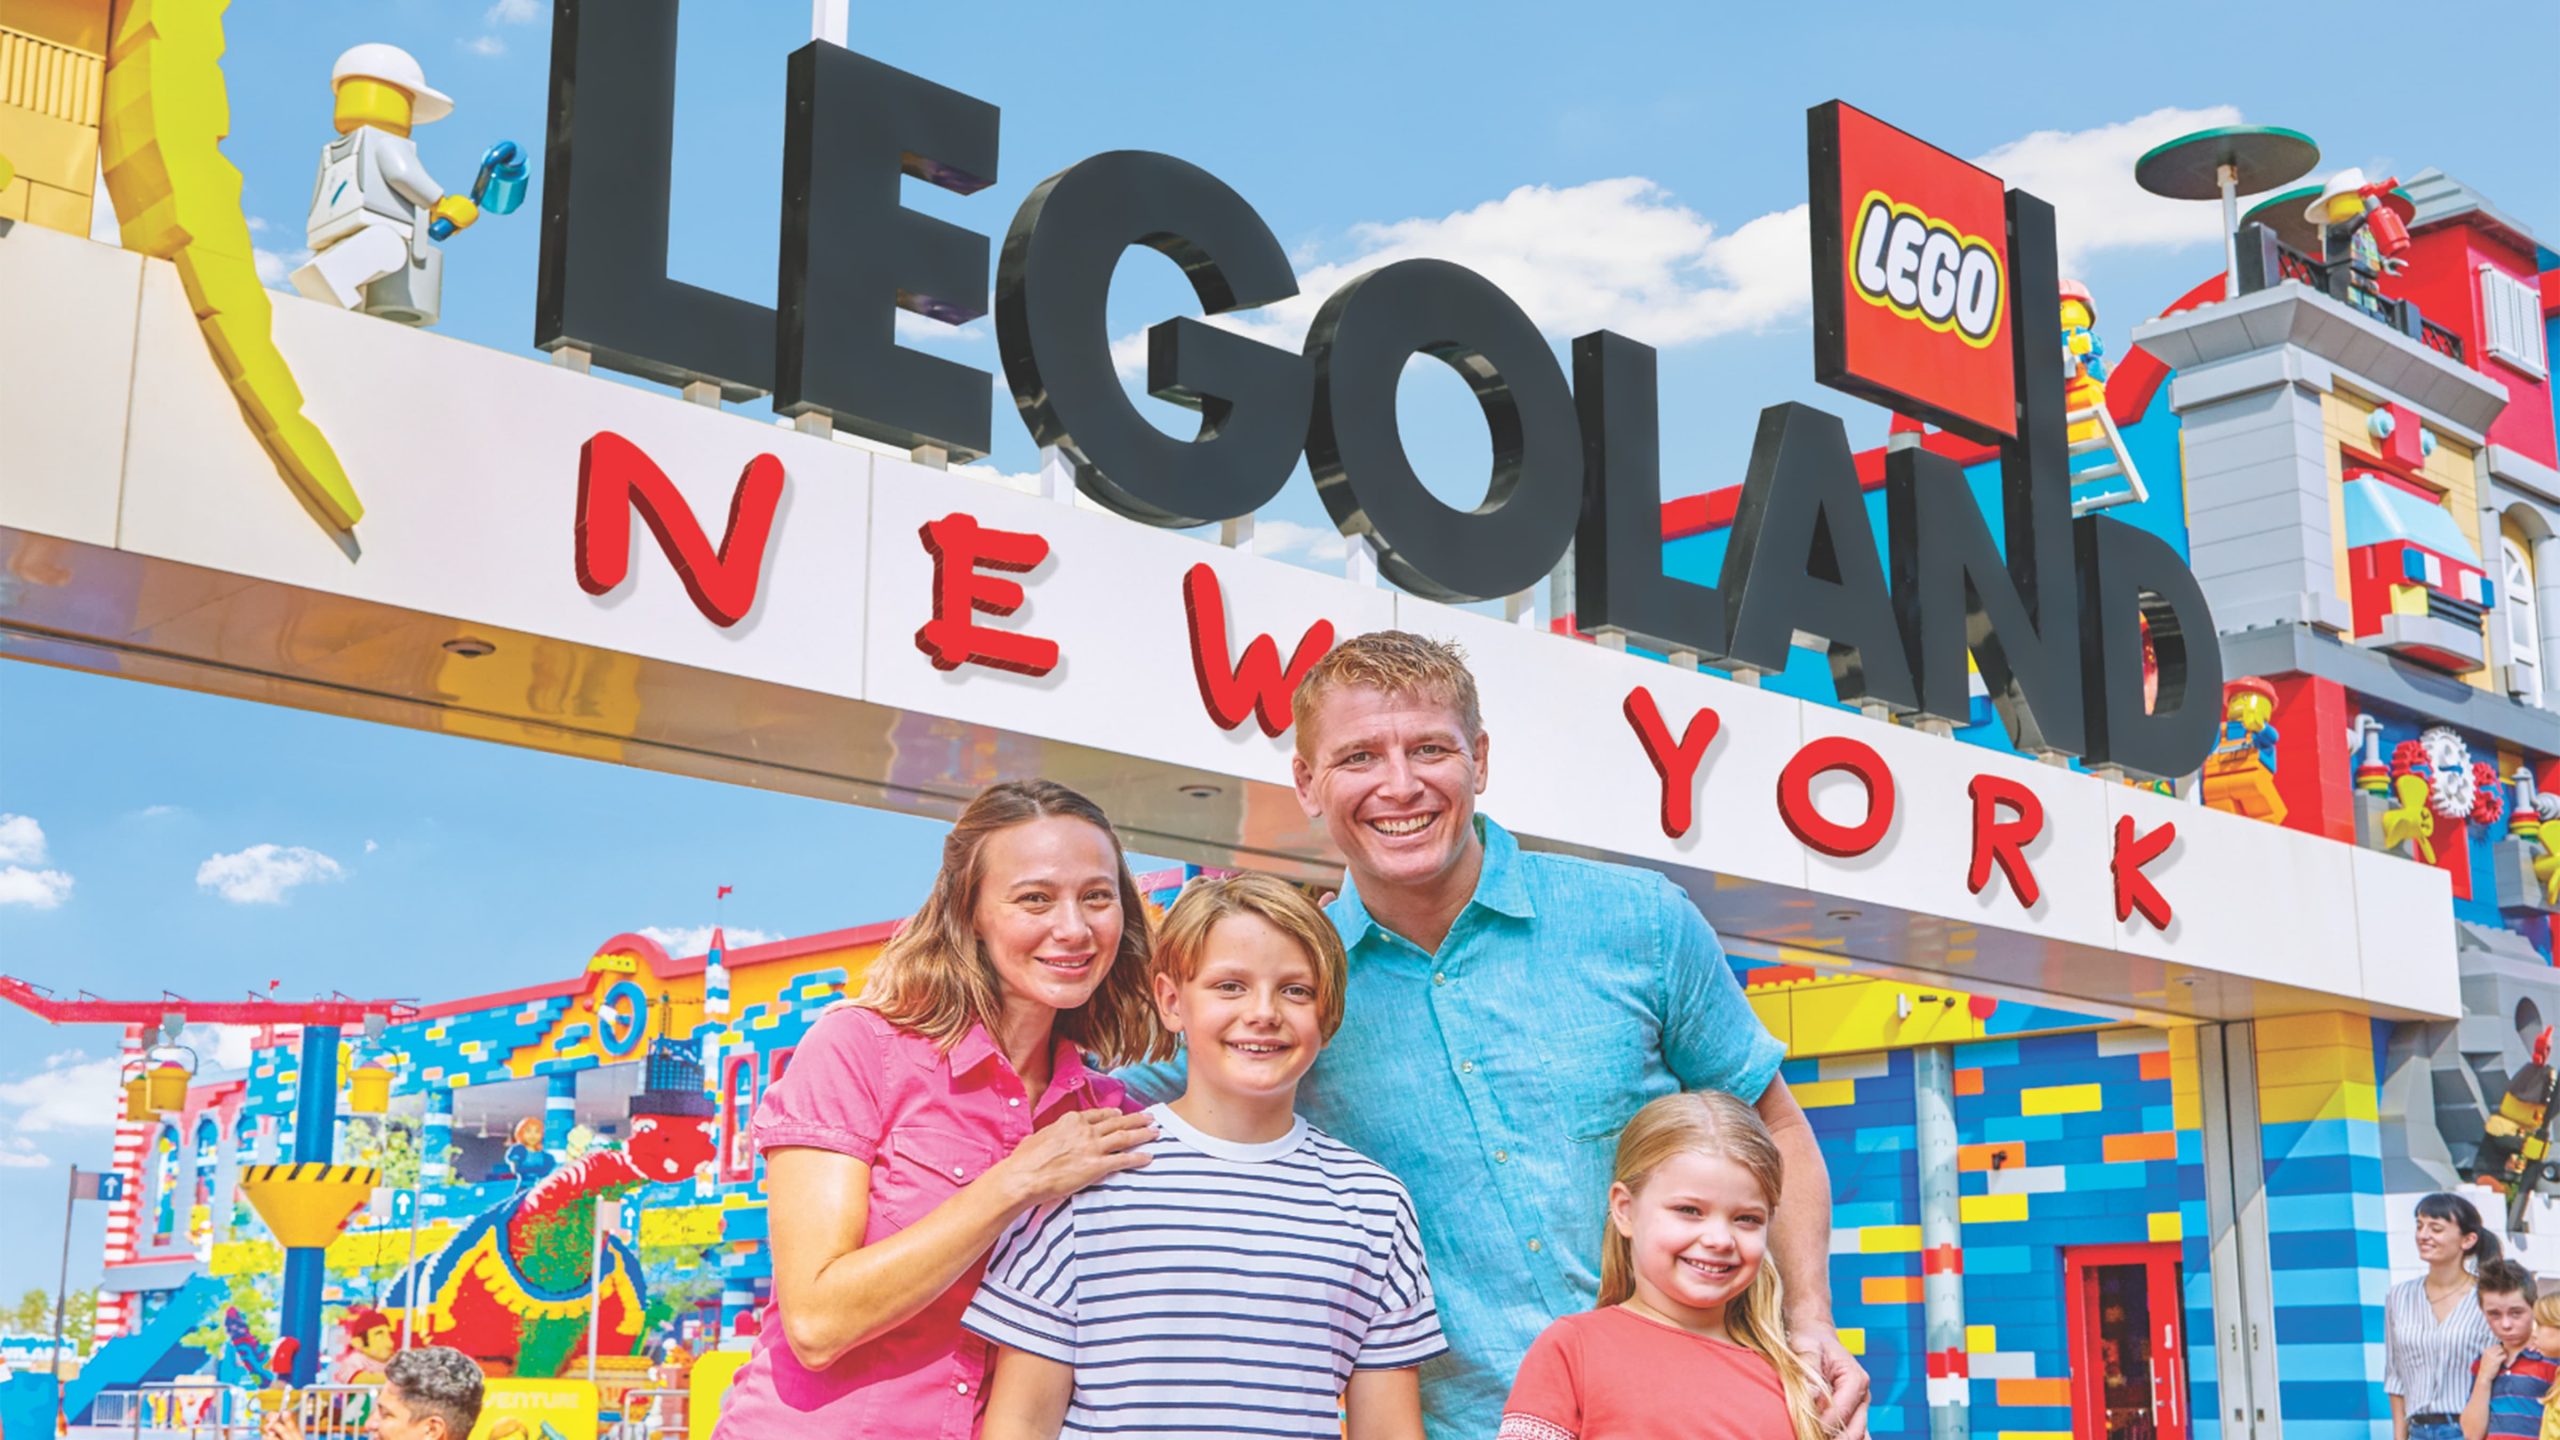 LEGOLAND New York is now open: Everything you need to know